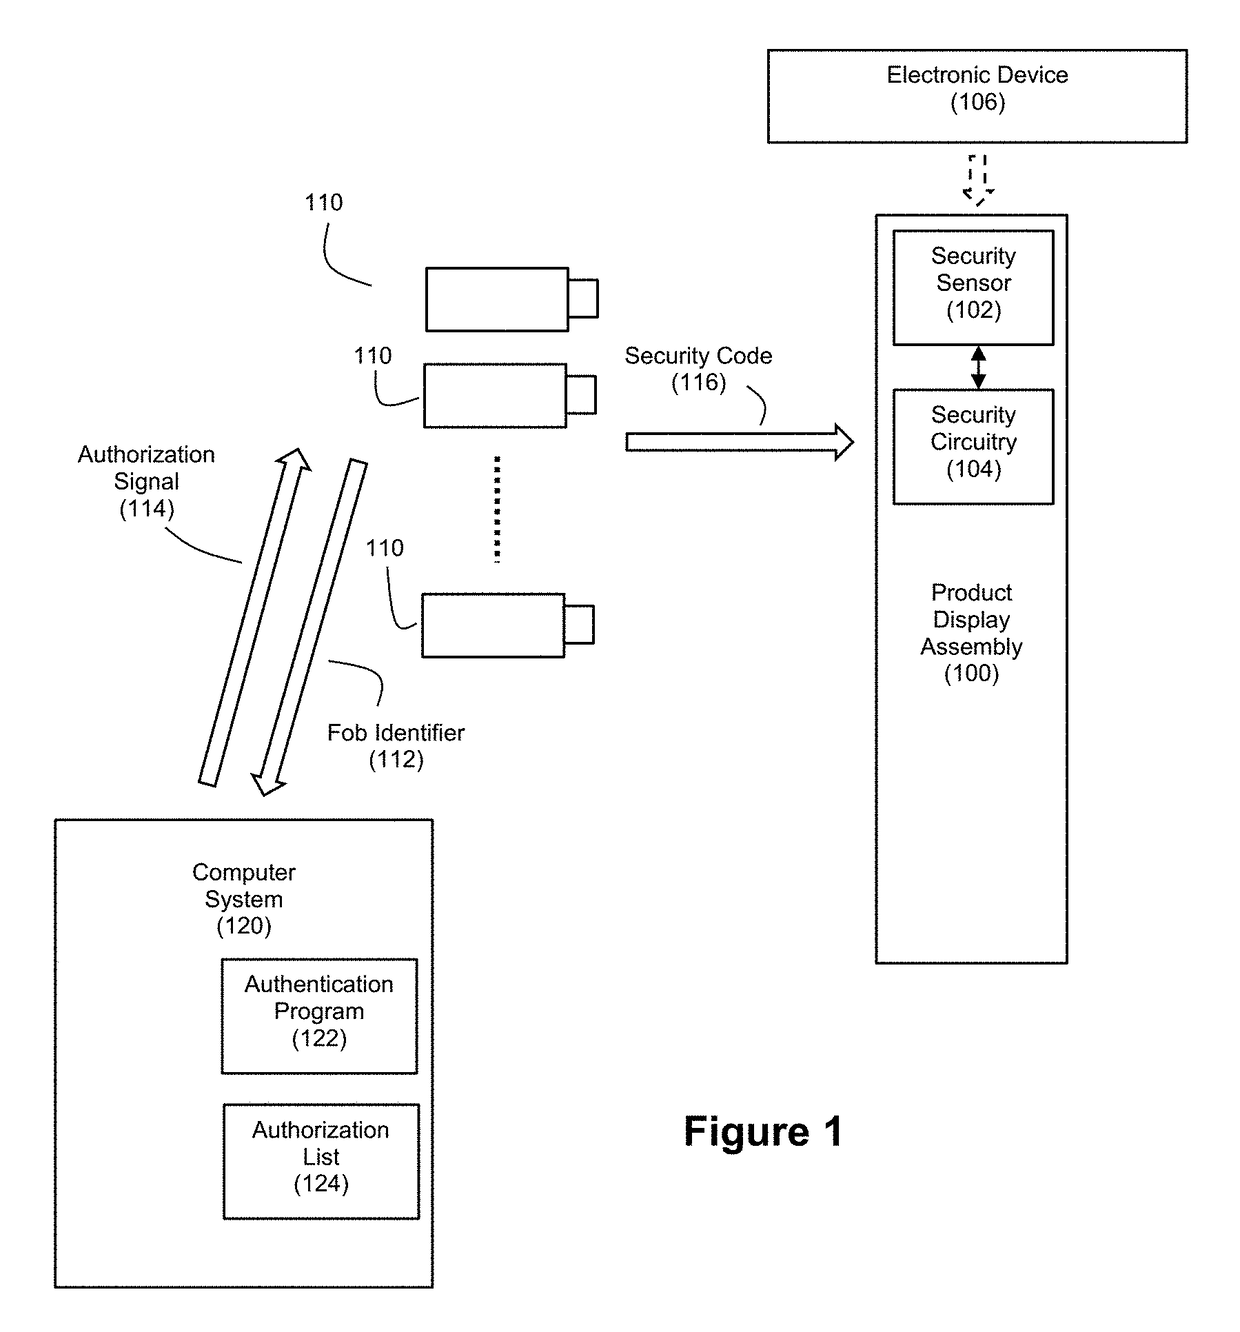 Gateway-based anti-theft security system and method